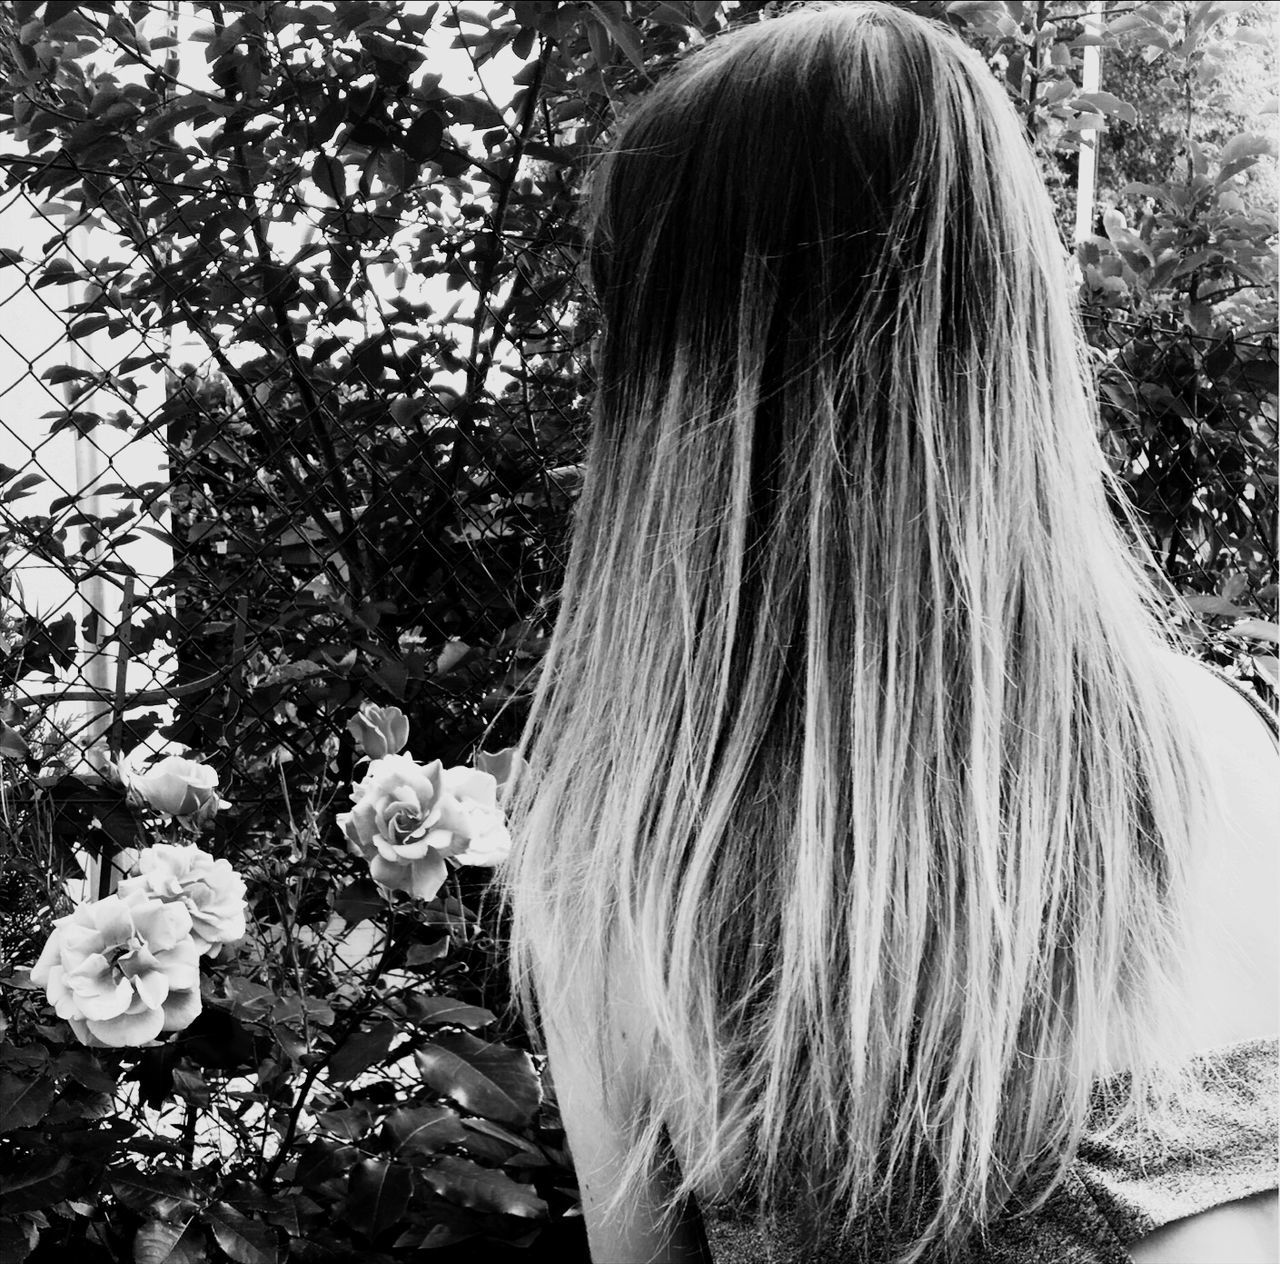 plant, hairstyle, flowering plant, flower, one person, hair, long hair, nature, rear view, adult, lifestyles, real people, women, leisure activity, tree, day, beauty in nature, growth, headshot, outdoors, human hair, straight hair